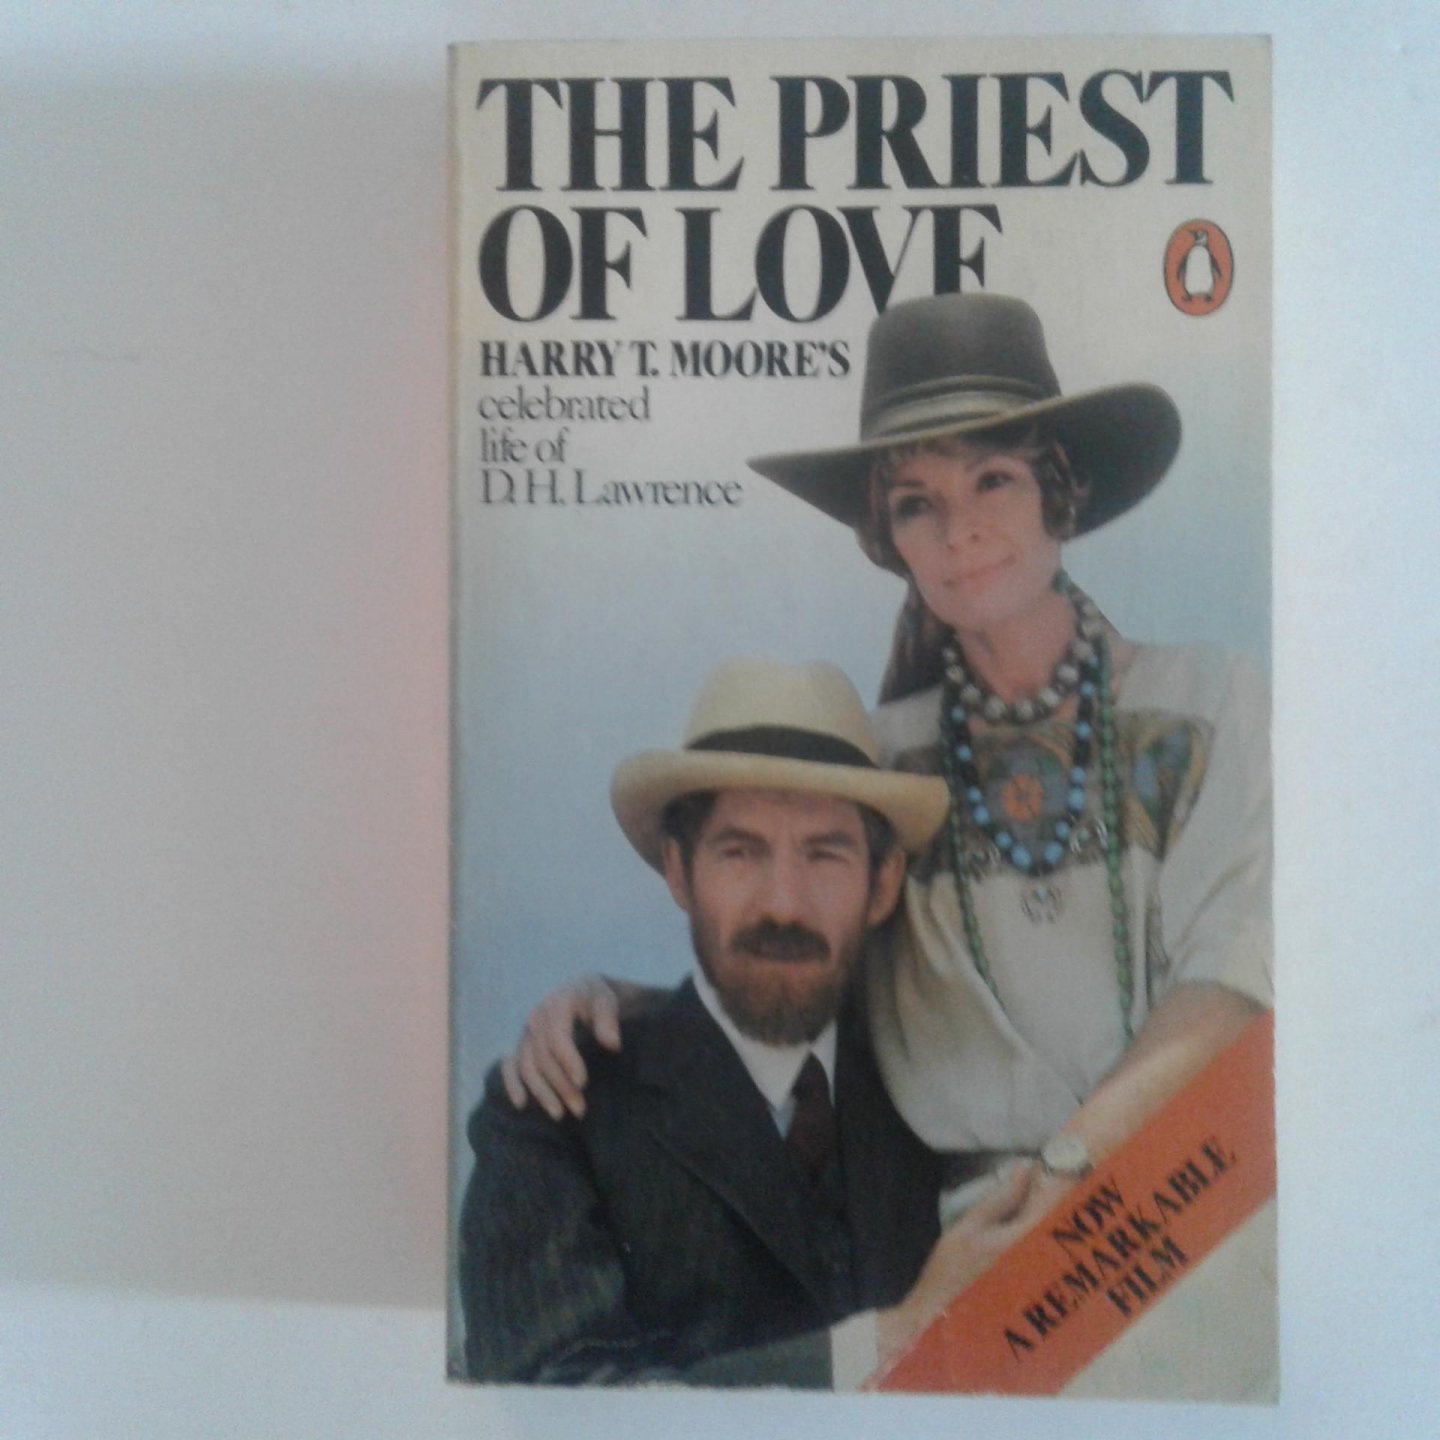 Moore, Harry T. - The Priest of Love ; A life of D.H. Lawrence